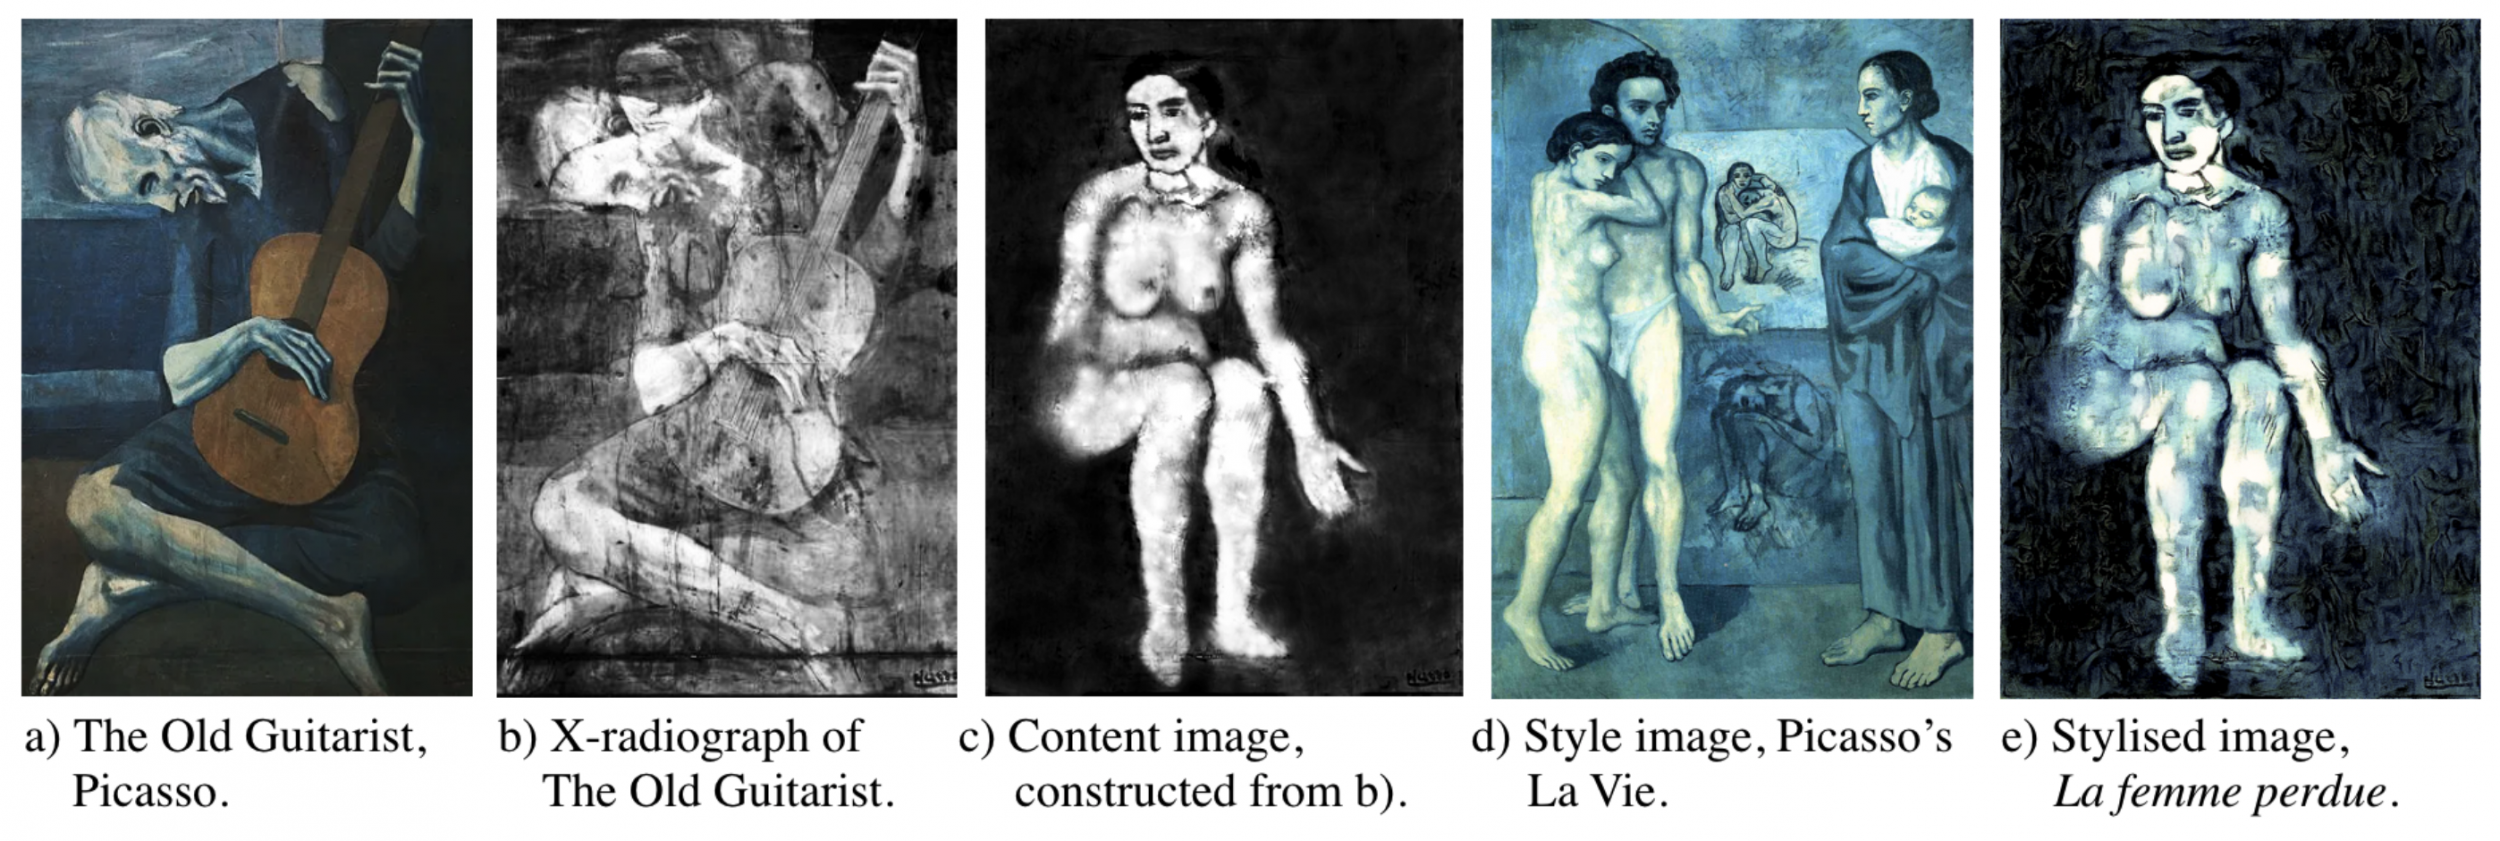 Screengrab from research paper showing "The Old Guitarist", an X-radiograph of "The Old Guitarist", the content image constructed from the painting, a style image, Picasso's "La Vie", and the styled image "La Femme Perdue"